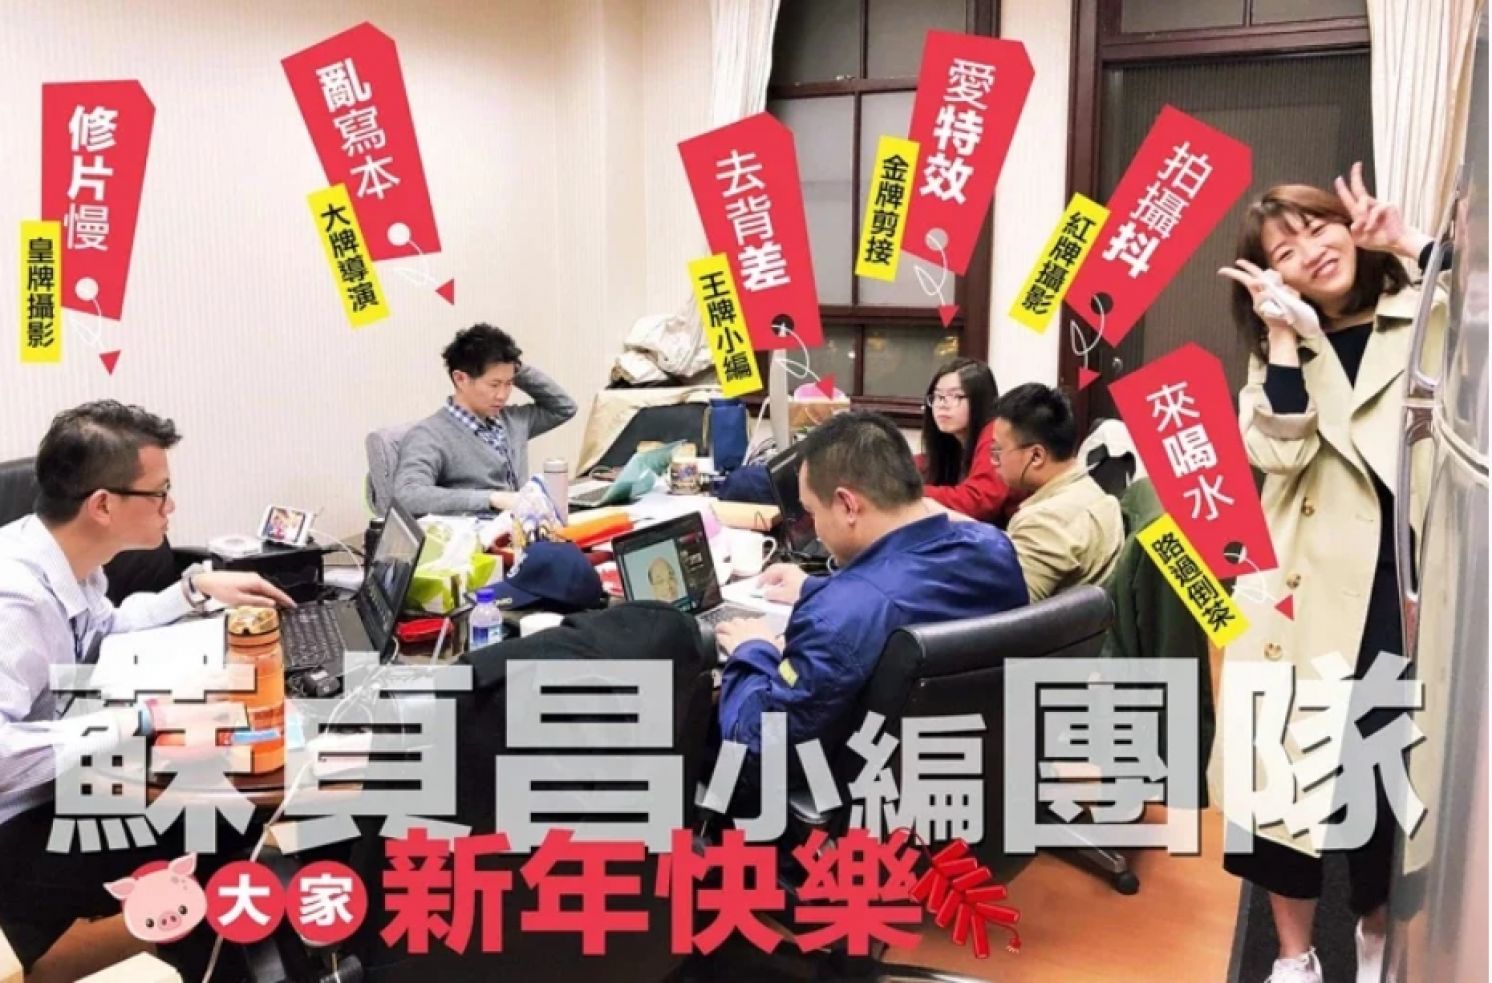 Executive Yuan Became Central Kitchen to Launch Internet Attacks Against Political Opponents